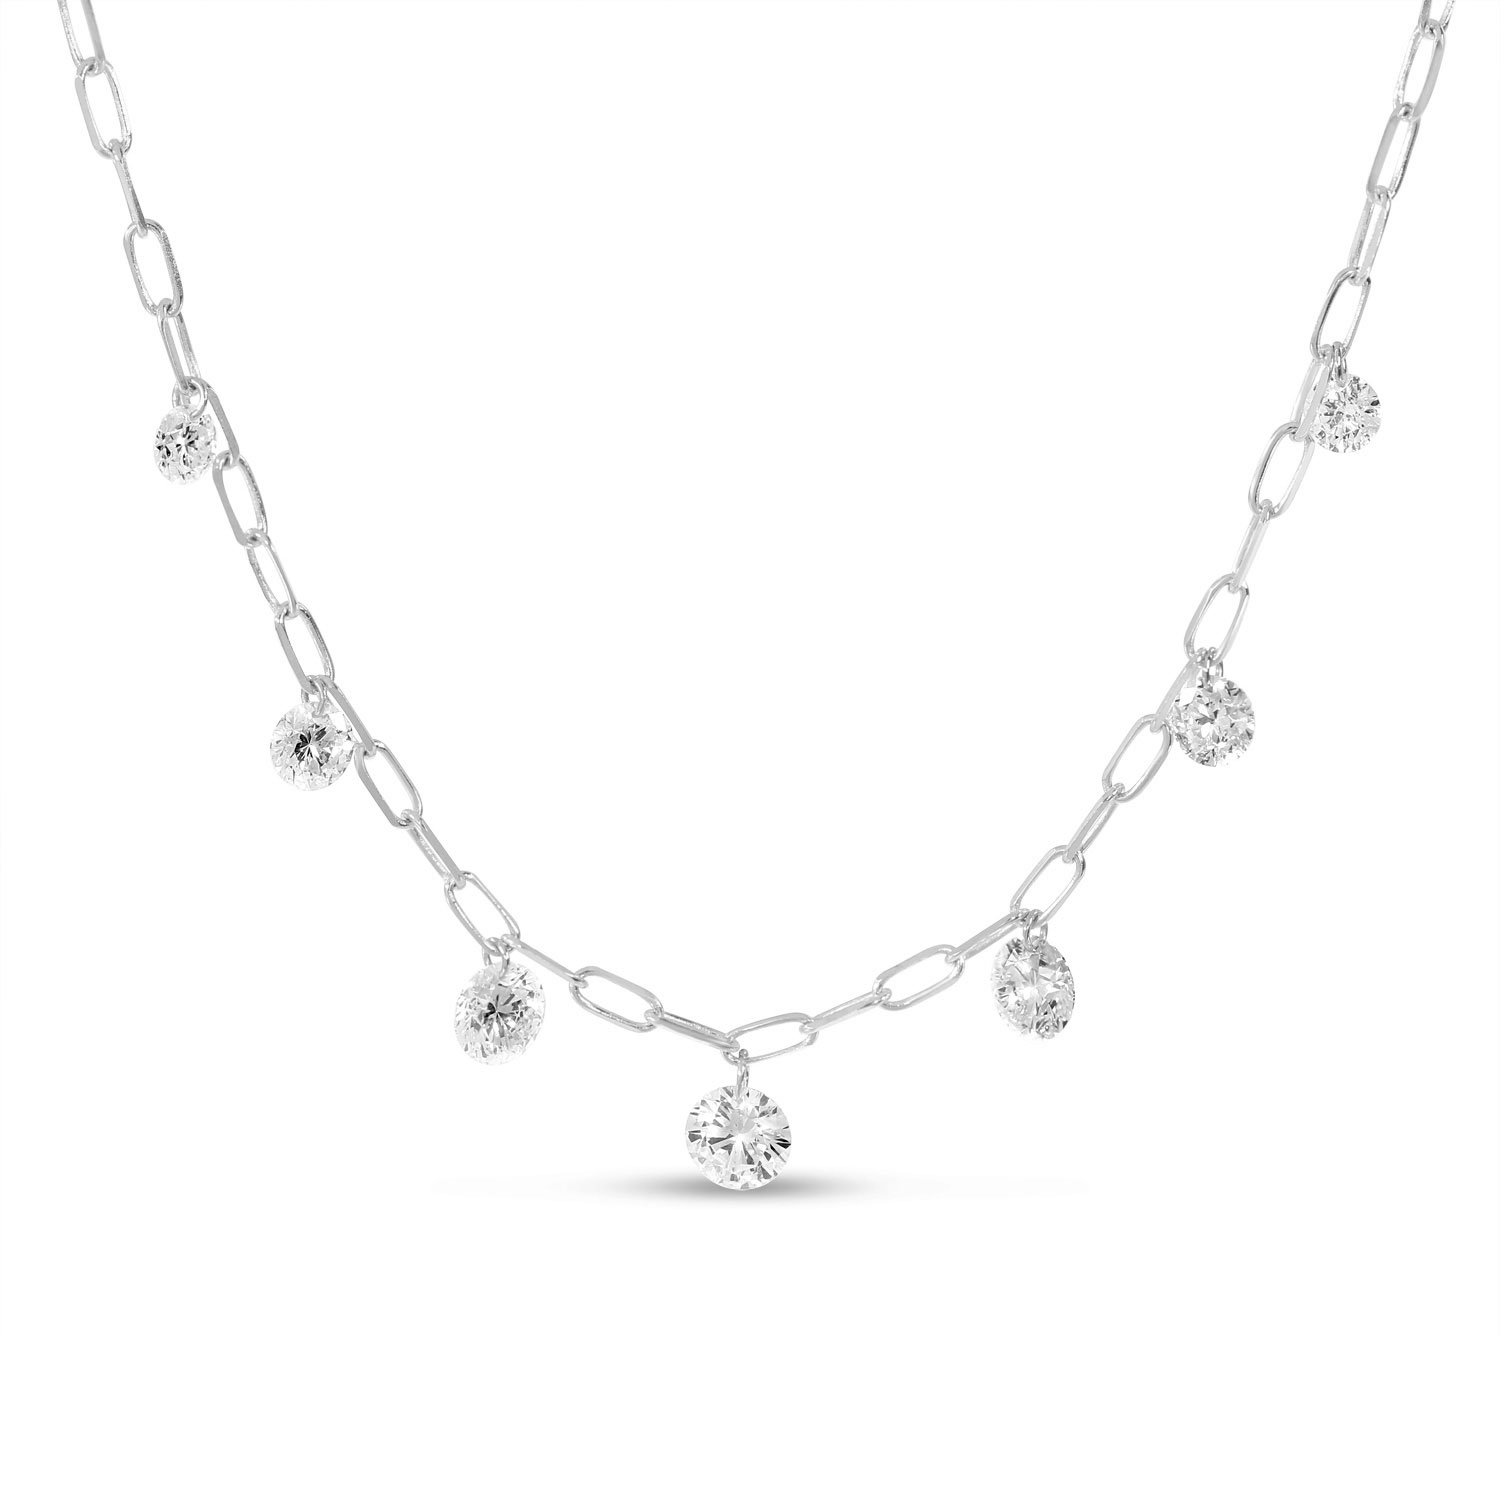 14K White Gold Graduated Dashing Diamond Paperclip Chain Necklace